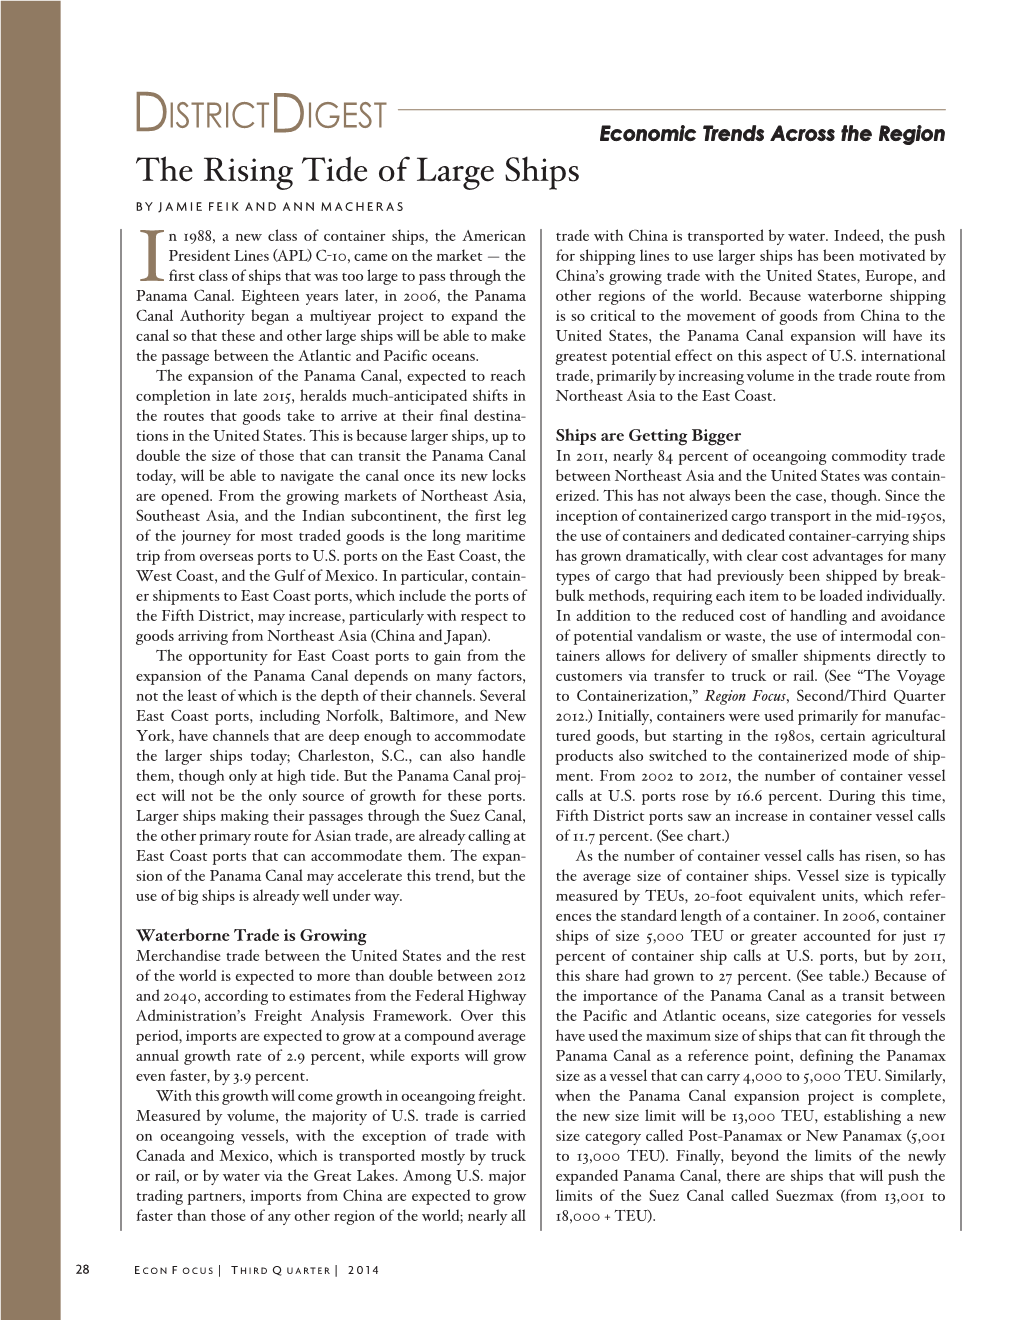 The Rising Tide of Large Ships by JAMIE FEIK and ANN MACHERAS